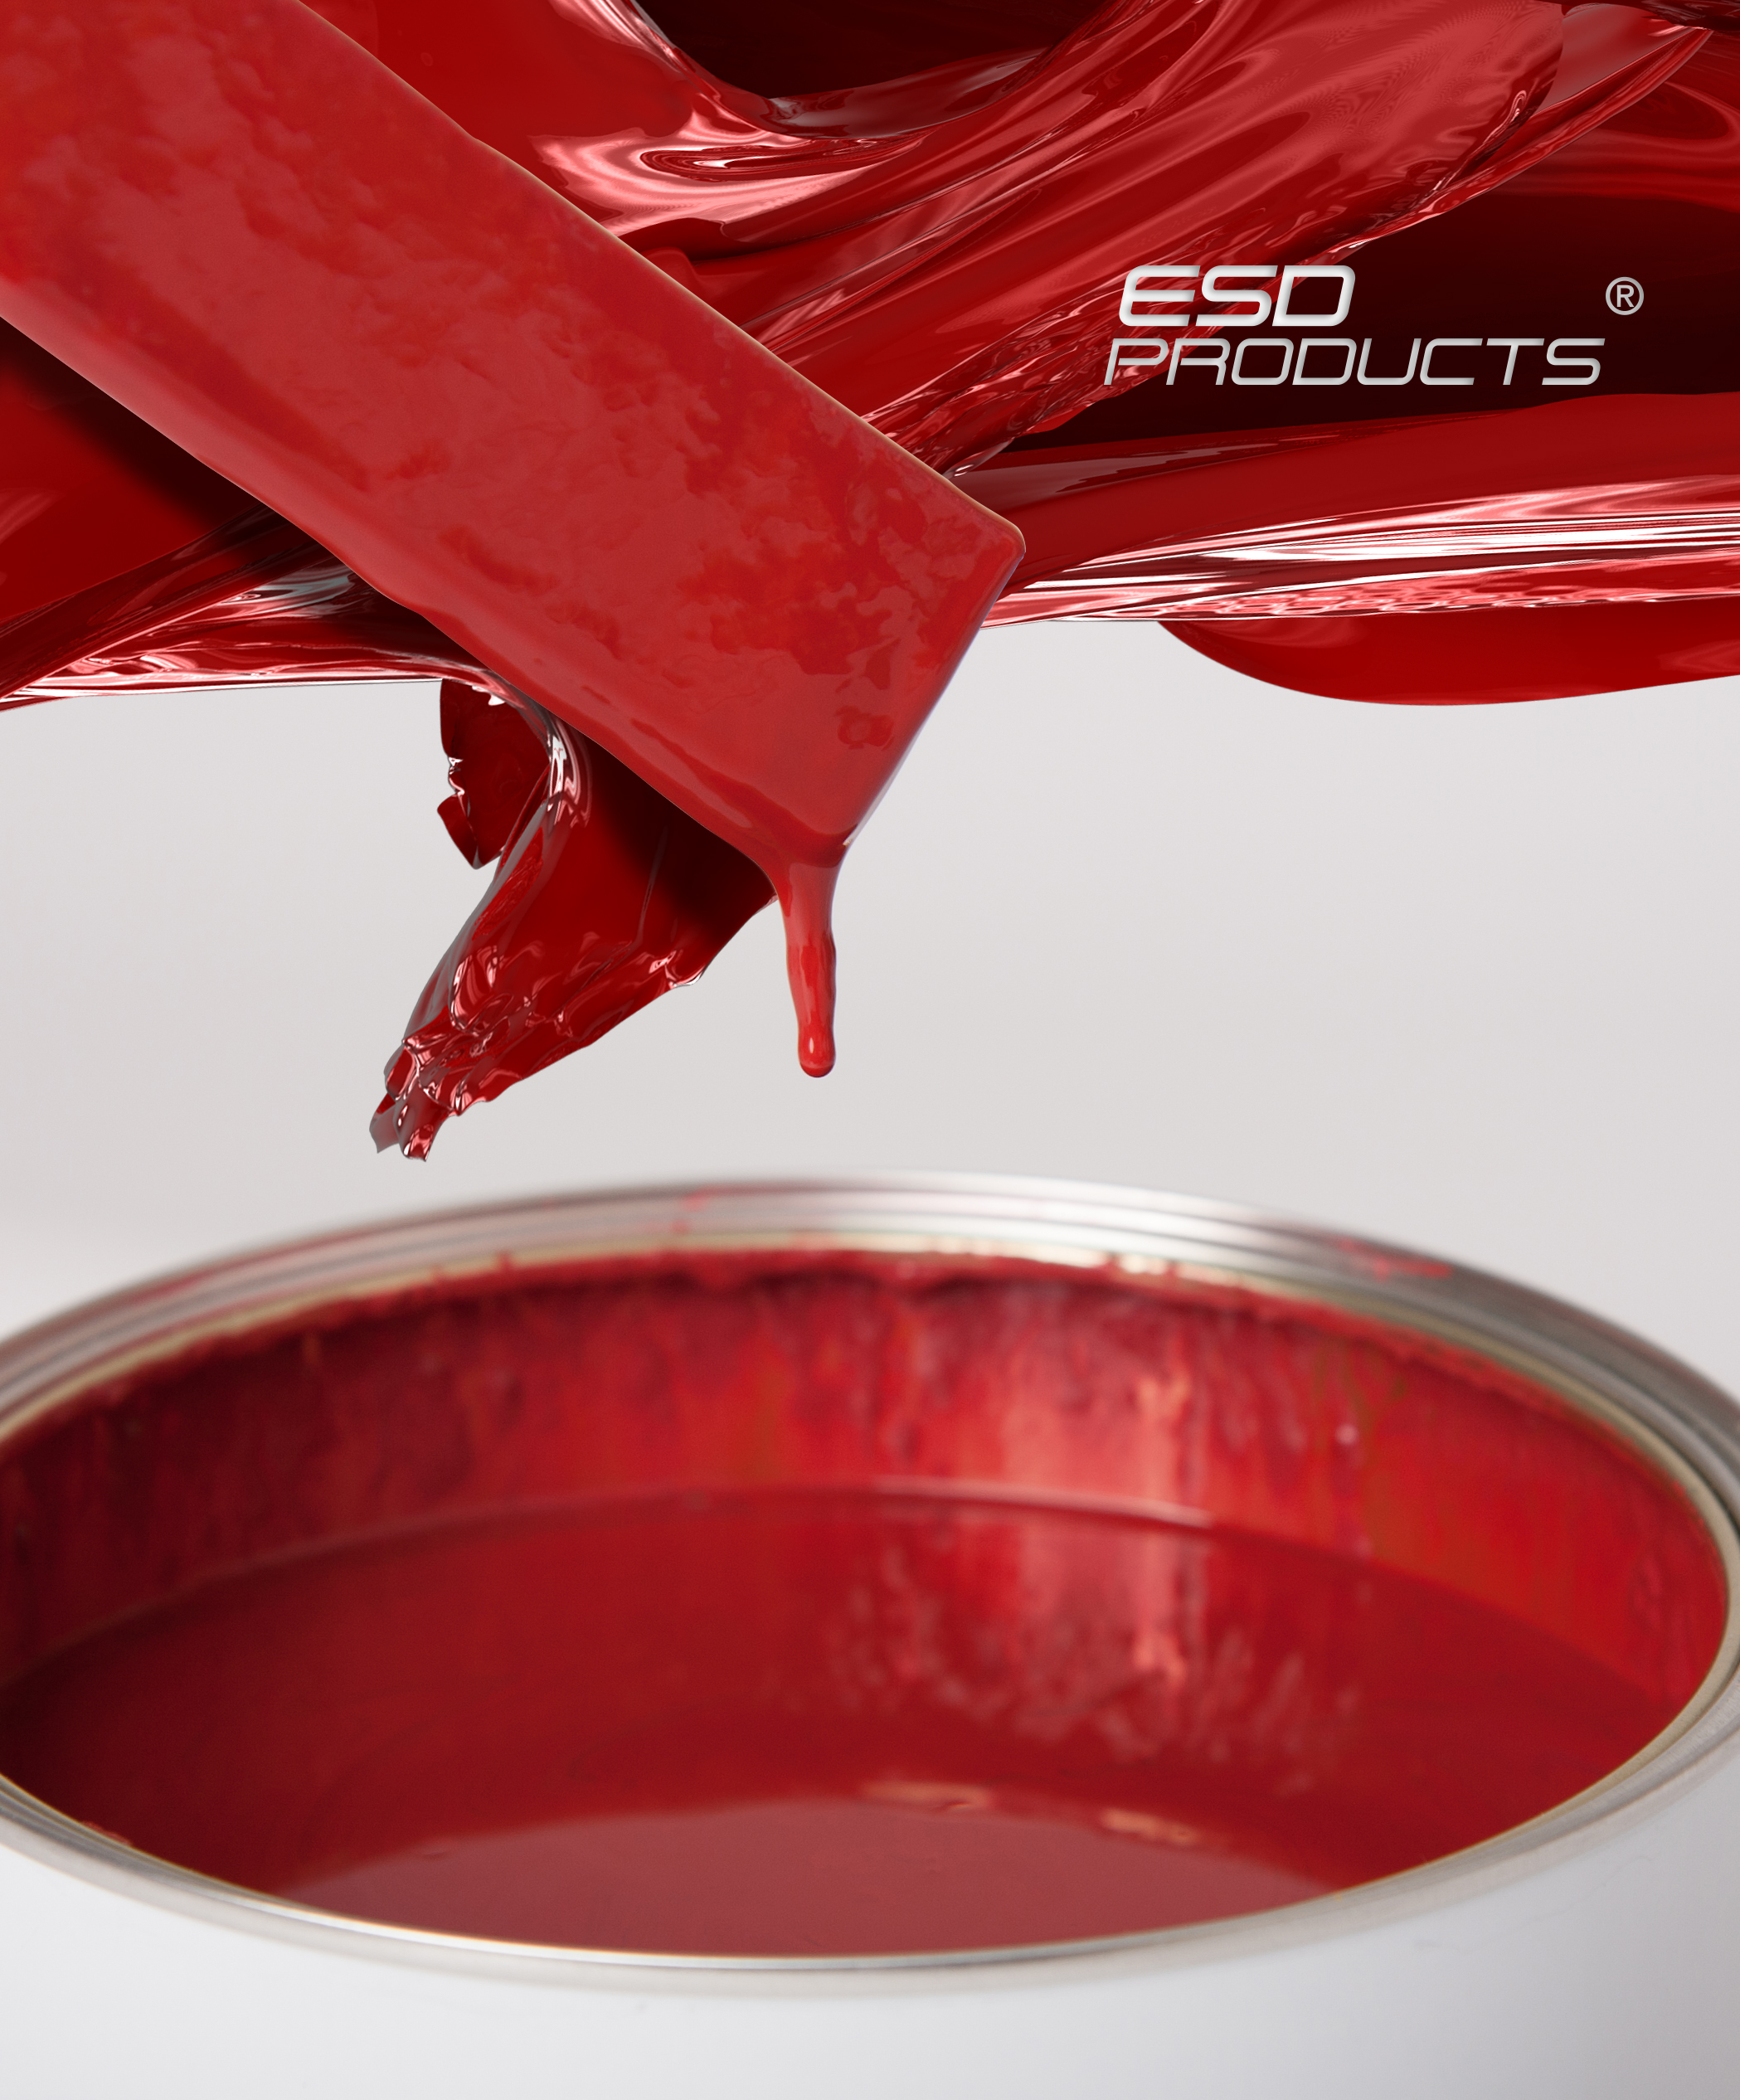 Electroguard A40®  Acrylic ESD Paint  Colour 3011 A40-3011 850-A40-3011 ESDproducts esdfloorcoatings EDSON